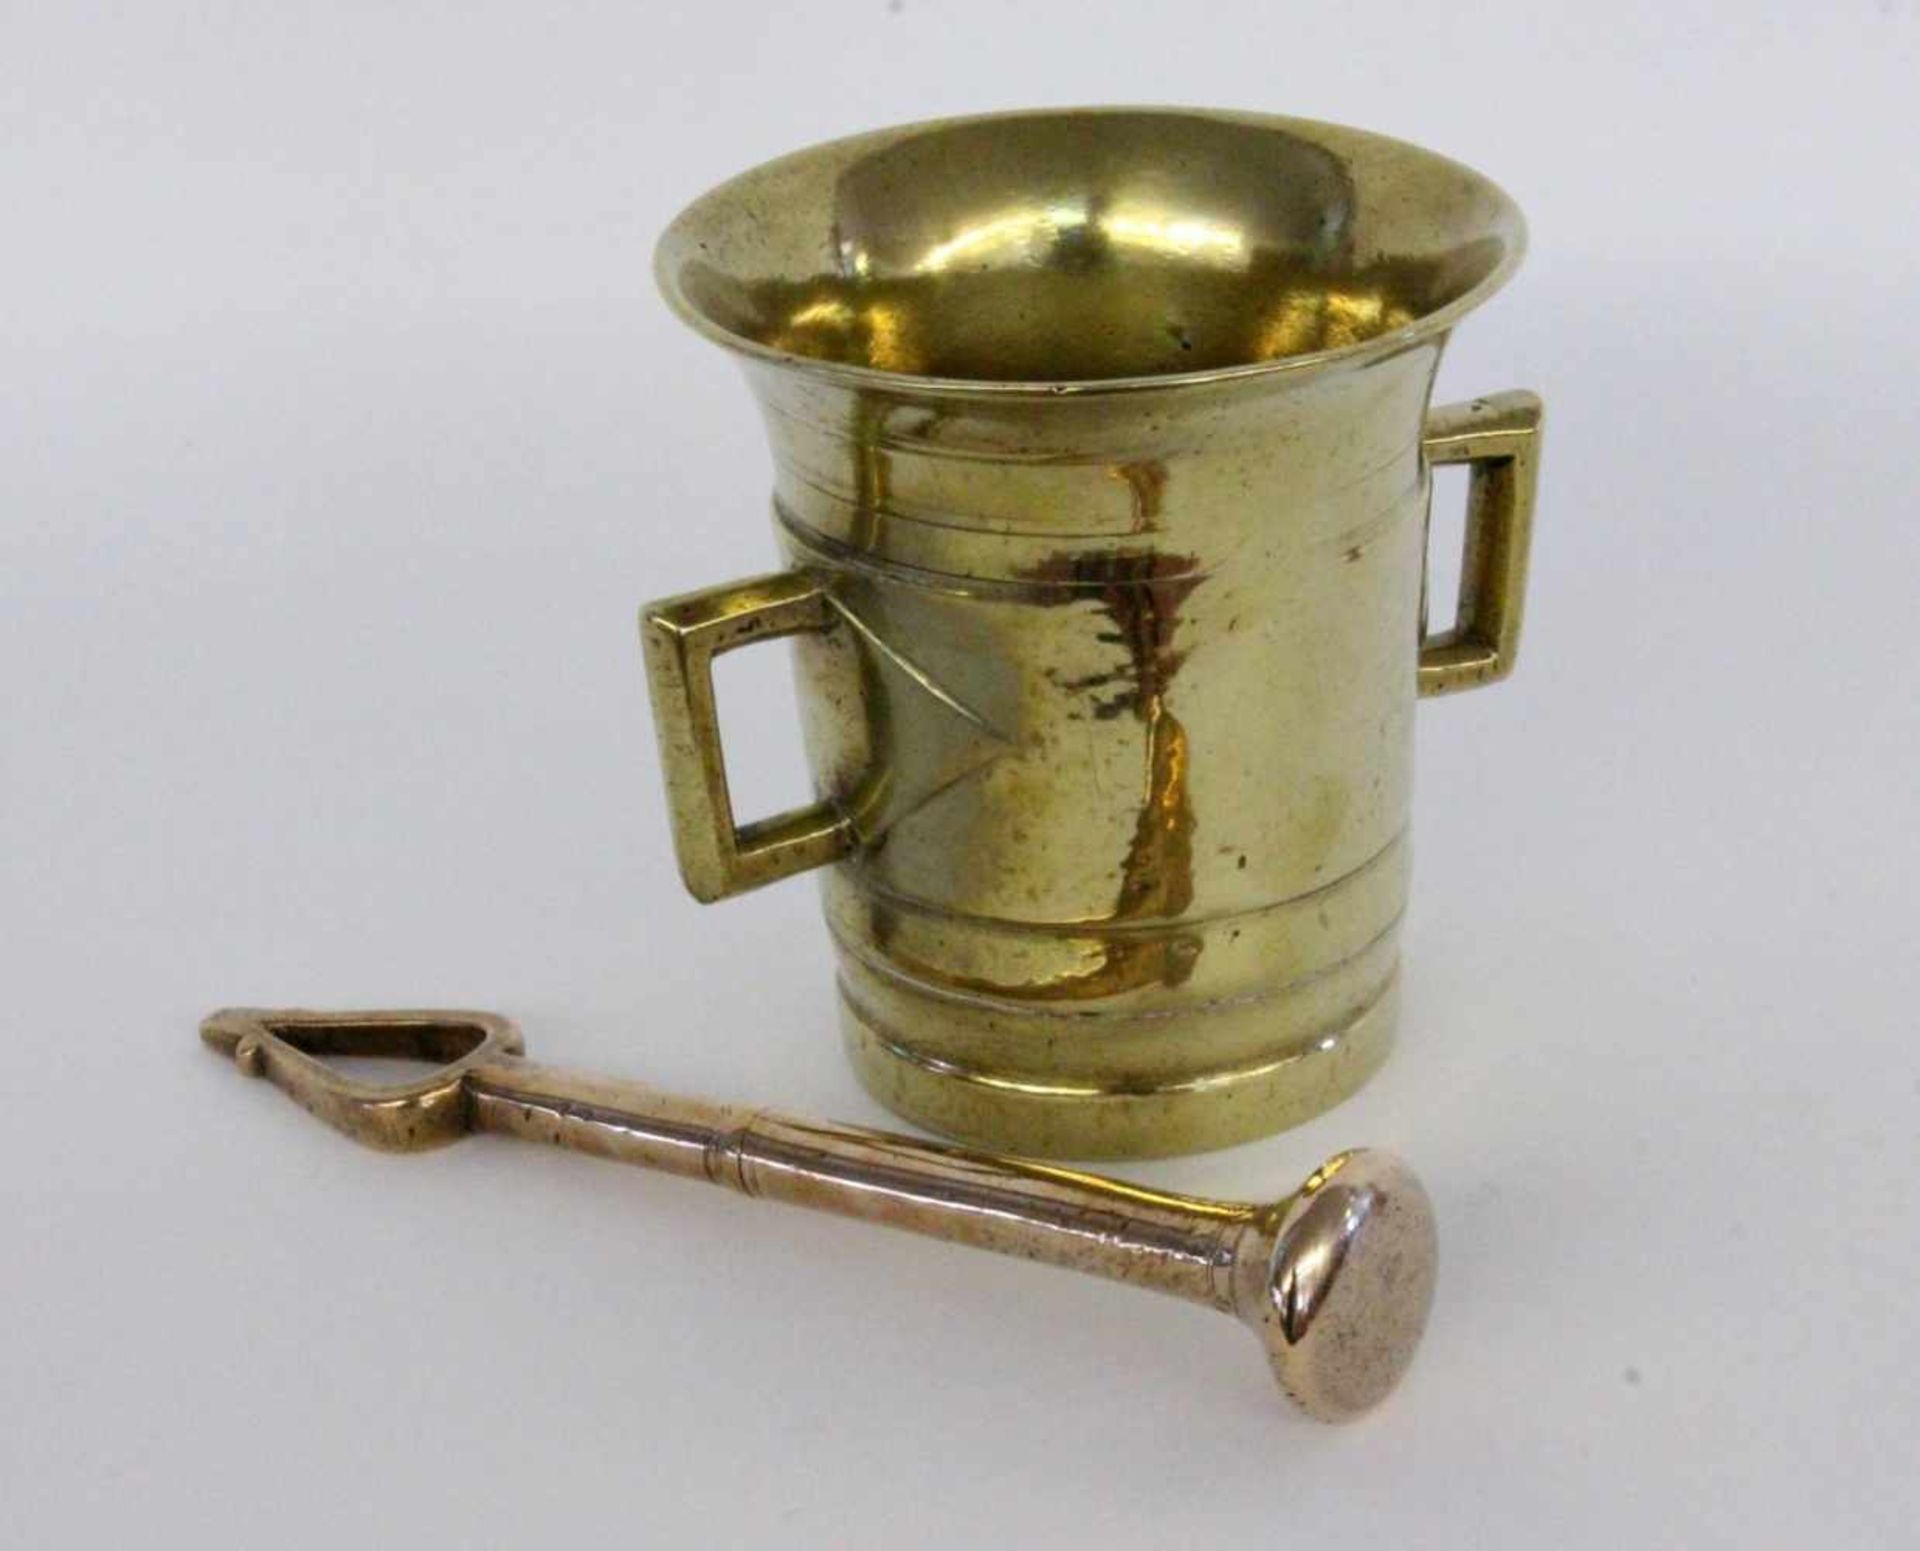 AN OLD BRASS MORTAR WITH PESTLE 15 cm high. Keywords: dish, miscellaneous pieces, tool,